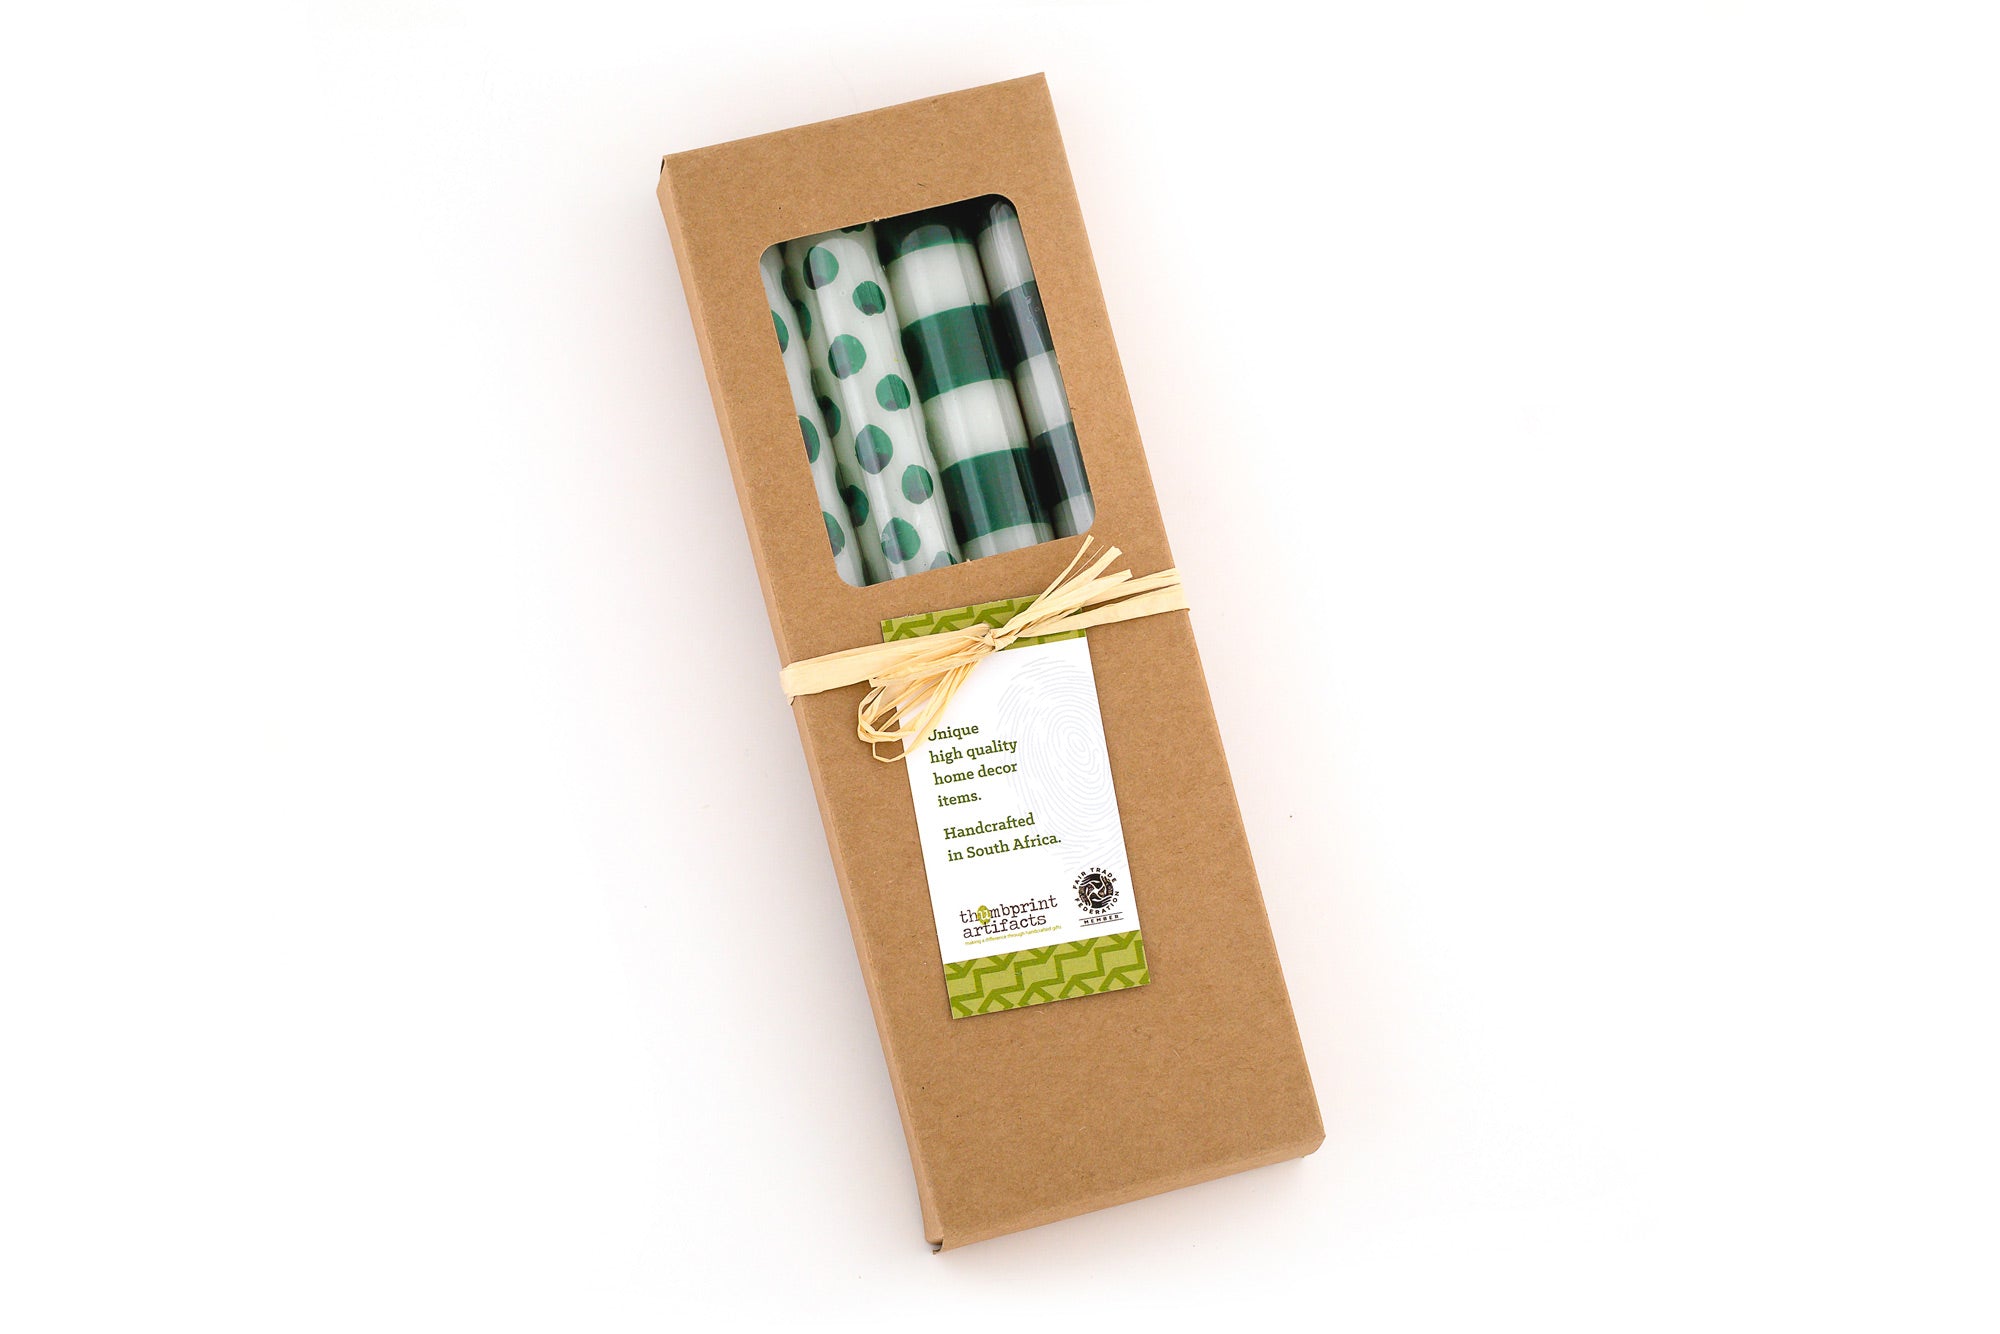 Four white tapers, two with dark green dots and two with dark green stripes, wrapped in celo, in a kraft brown gift box, tied with story card.